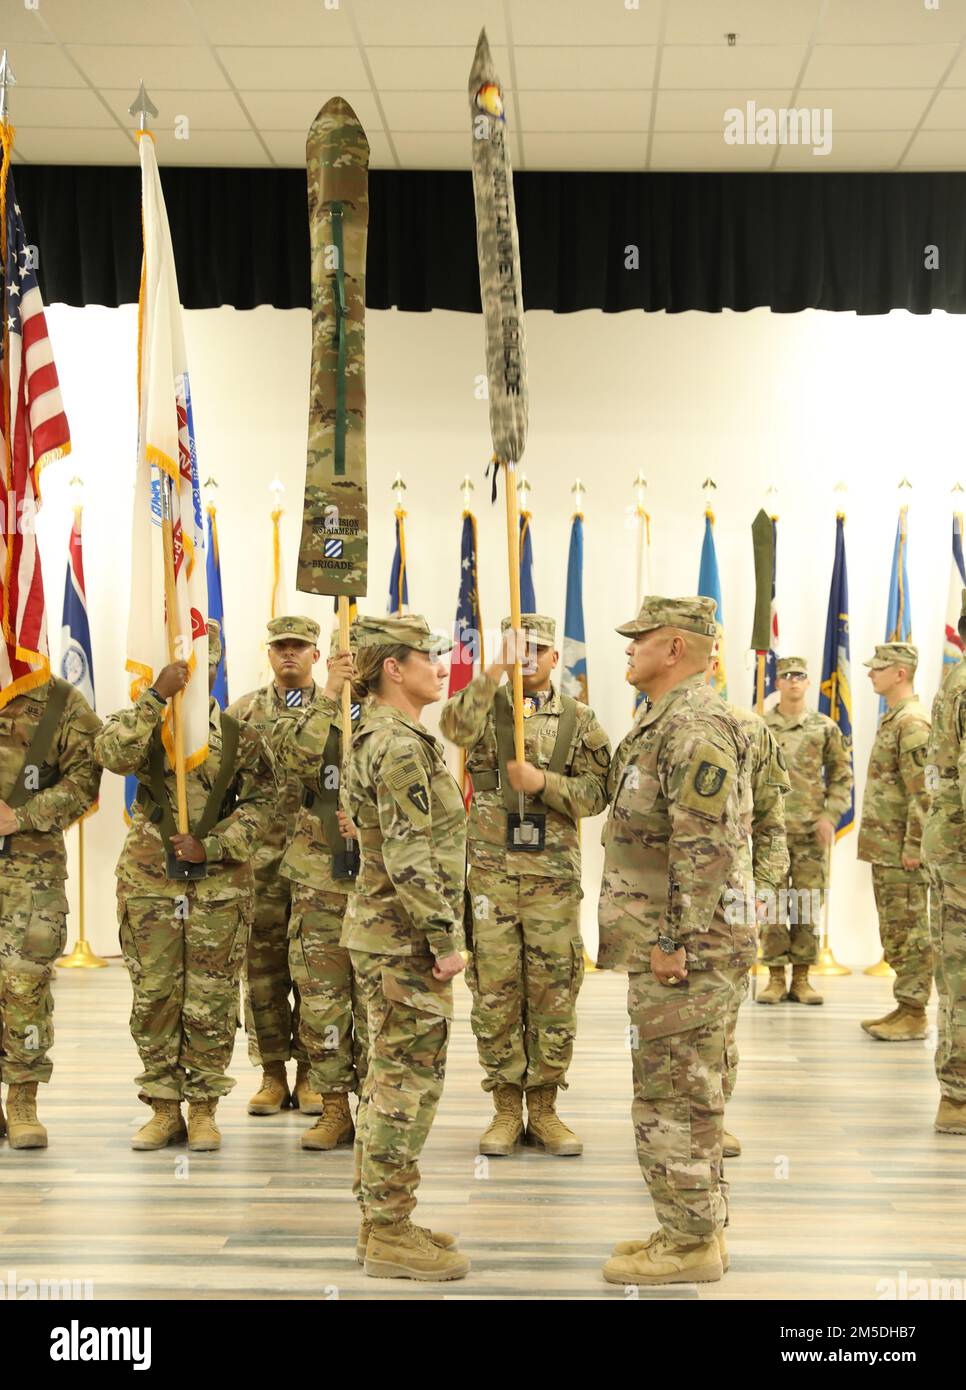 Col. Carrie L. Perez and Command Sgt. Maj. Ernesto Castillo of 36th Sustainment Brigade Accepted authority from 3rd Division Sustainment Brigade, 3rd Infantry Division’s Col. David Key and Command Sgt. Maj. Denice Malave by hosting a Transfer of Authority Ceremony on March 04, 2022 on Camp Arifjan, Kuwait. Stock Photo